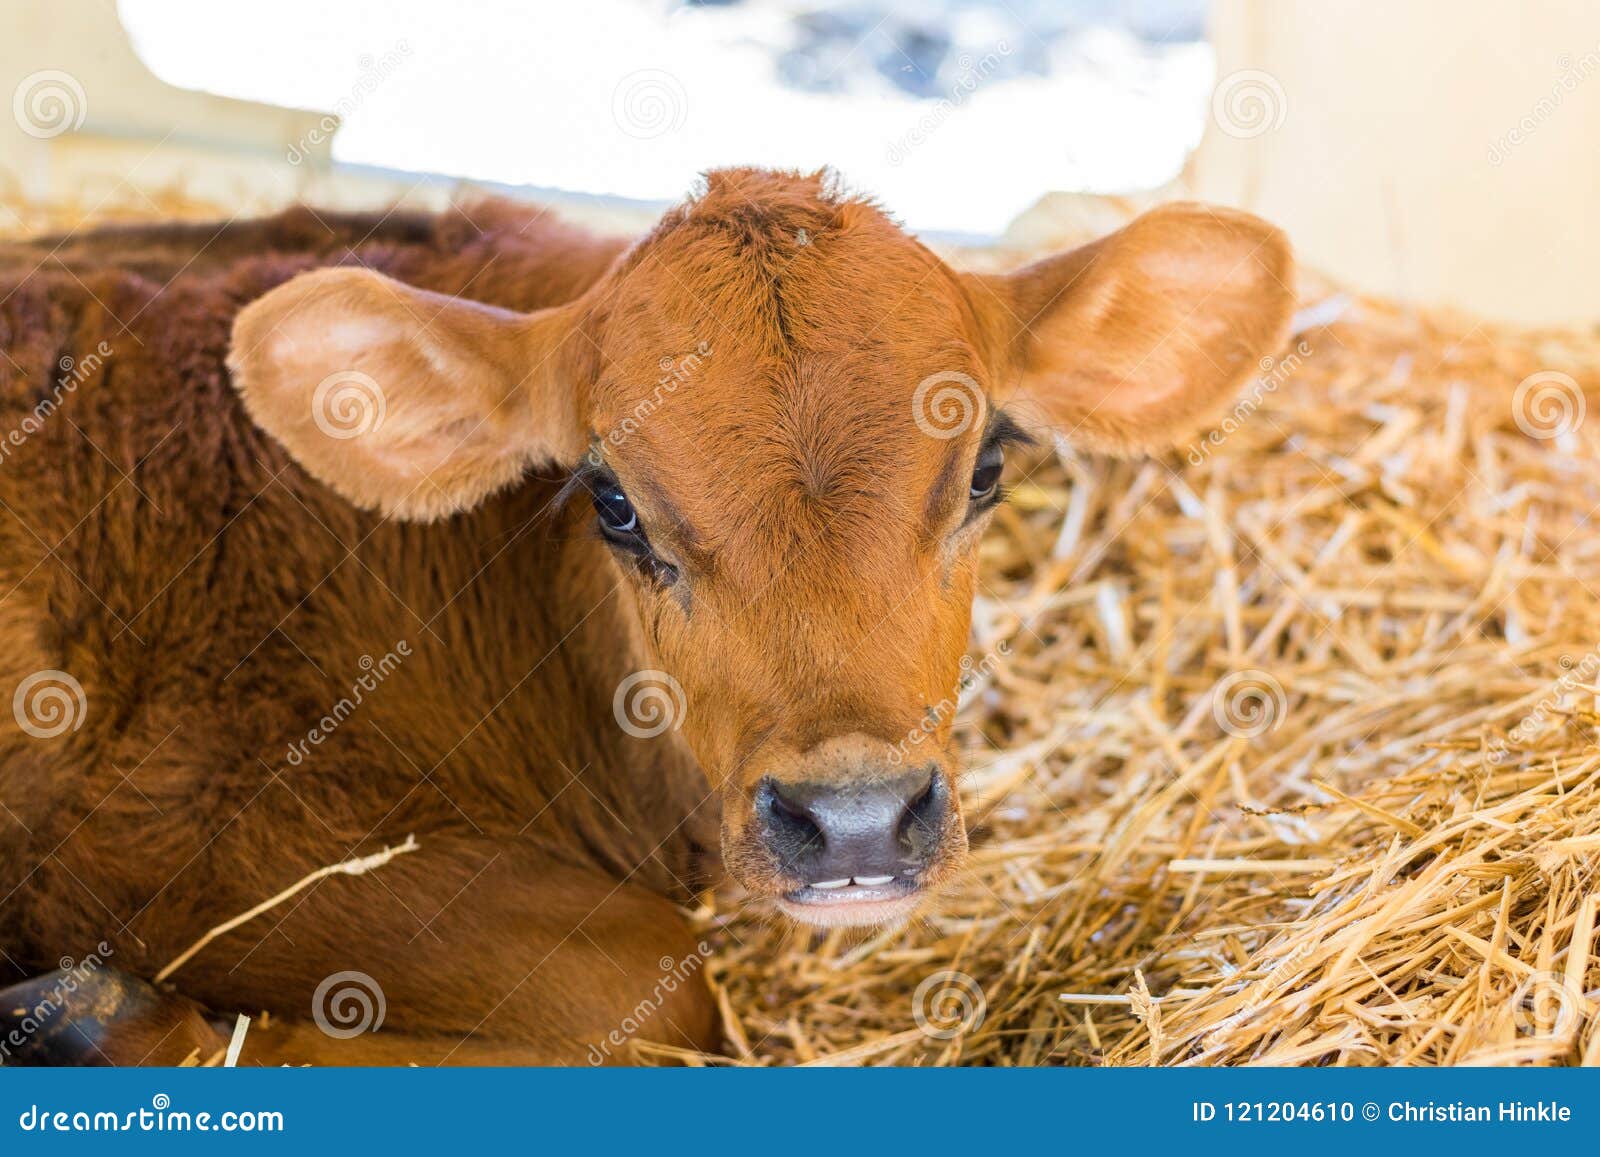 Baby Cows at a Dairy Farm in Central Pennsylvania Stock Photo - Image ...